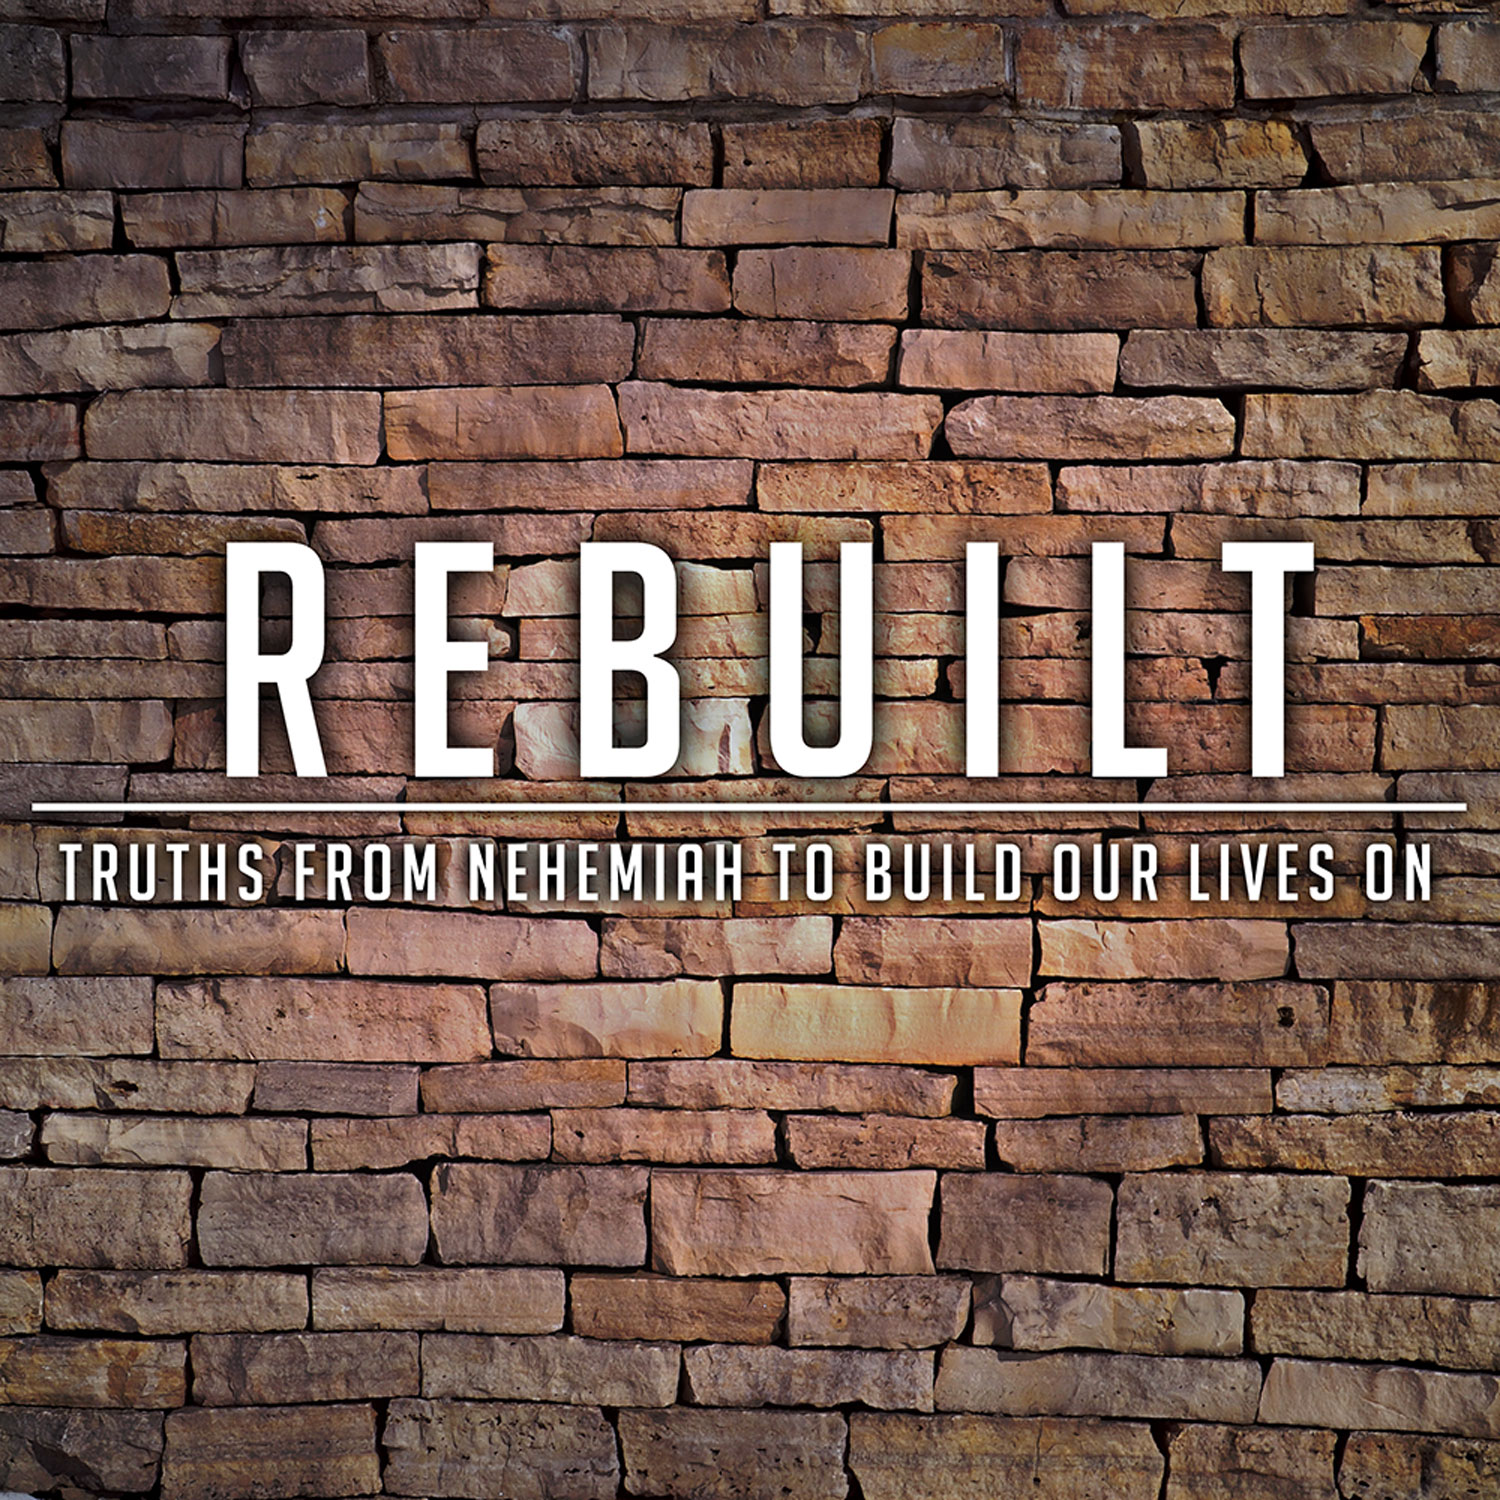 Restoration In and Through Us